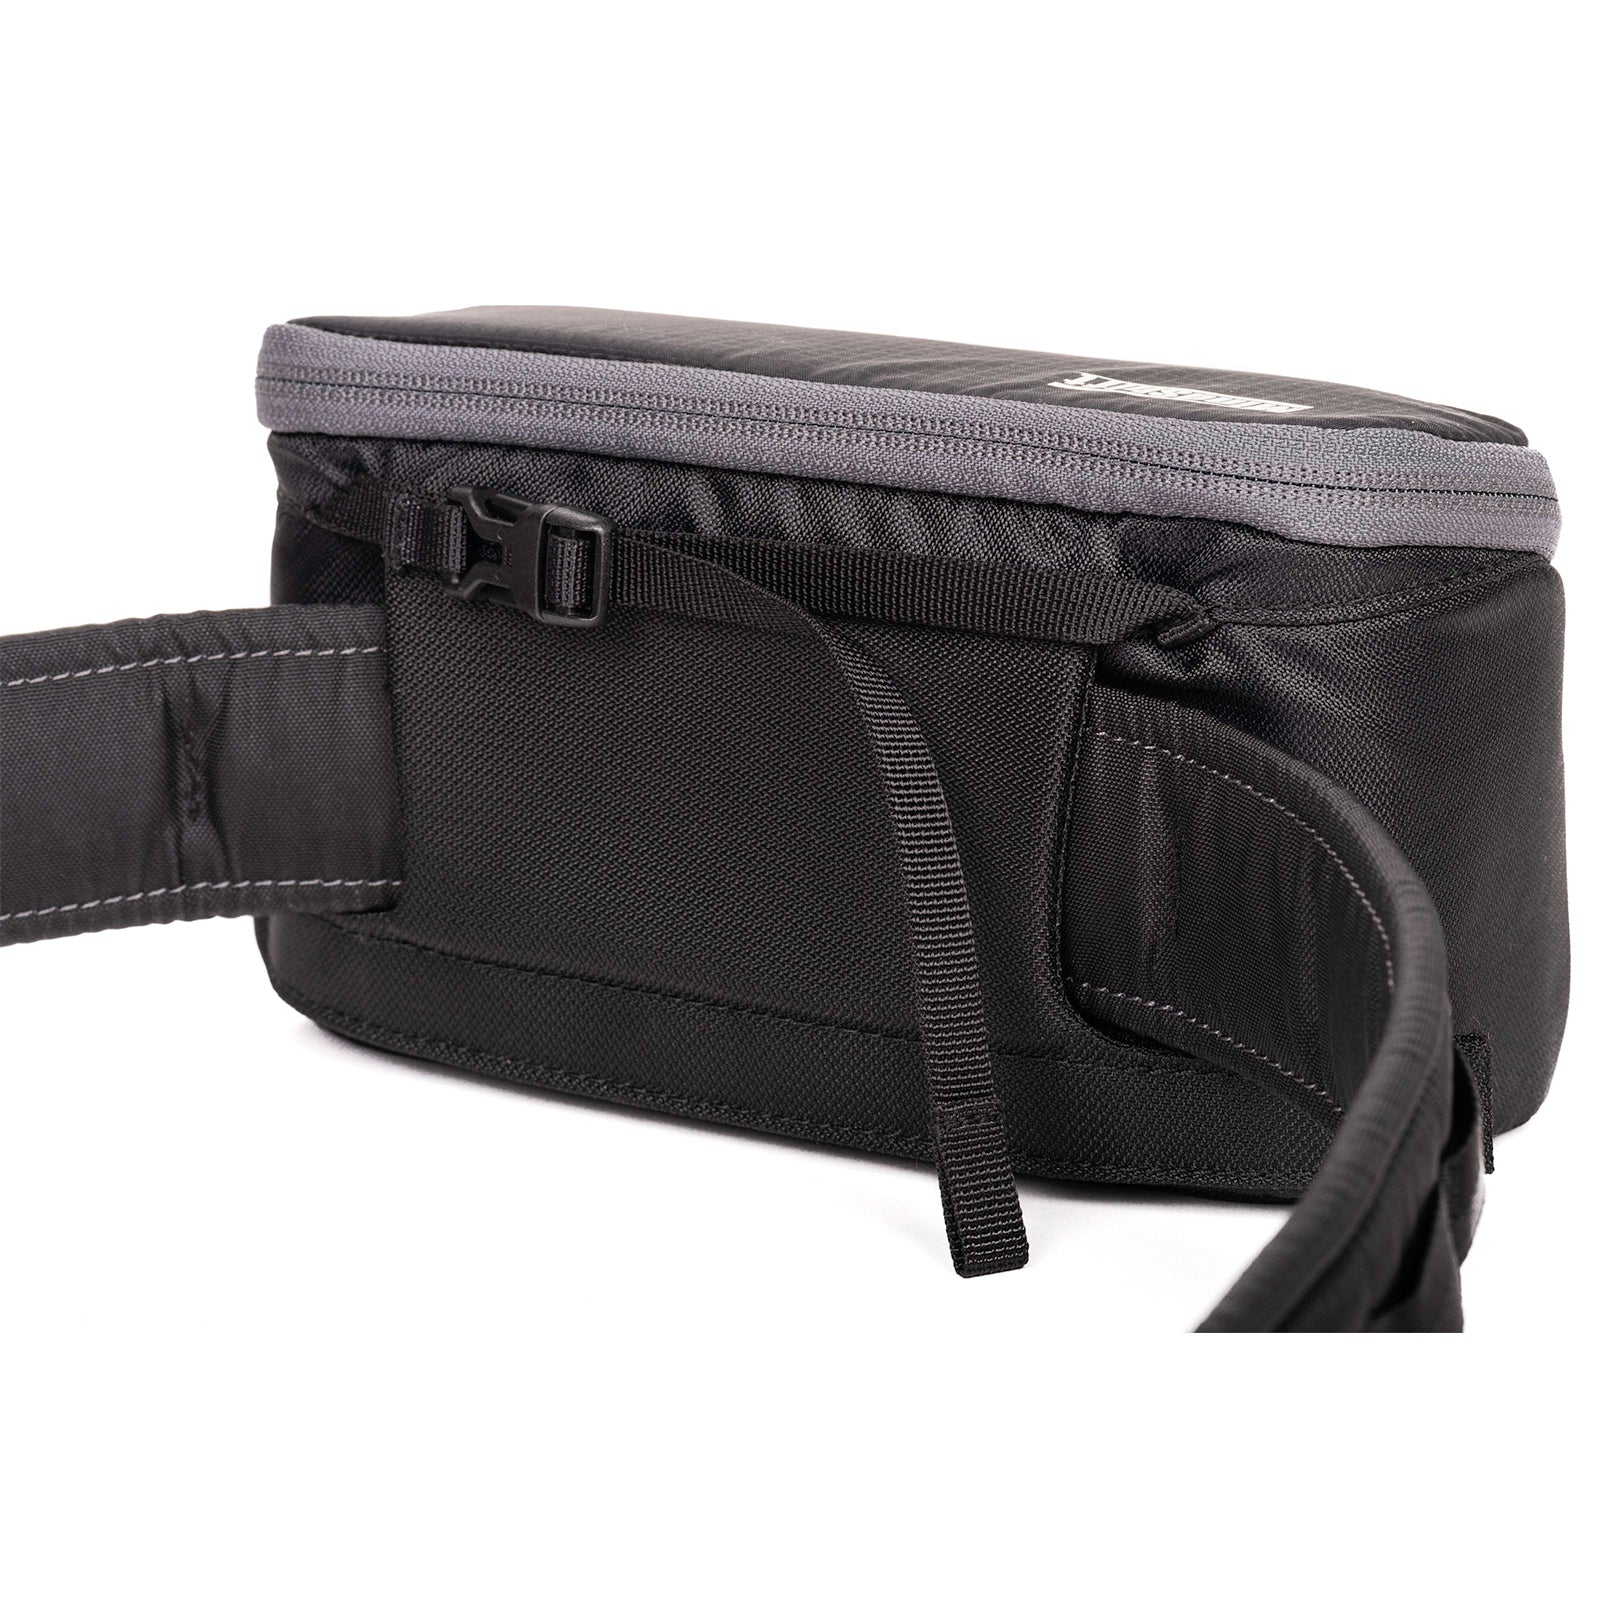 Belt pass-through and attachment strap with SR buckle